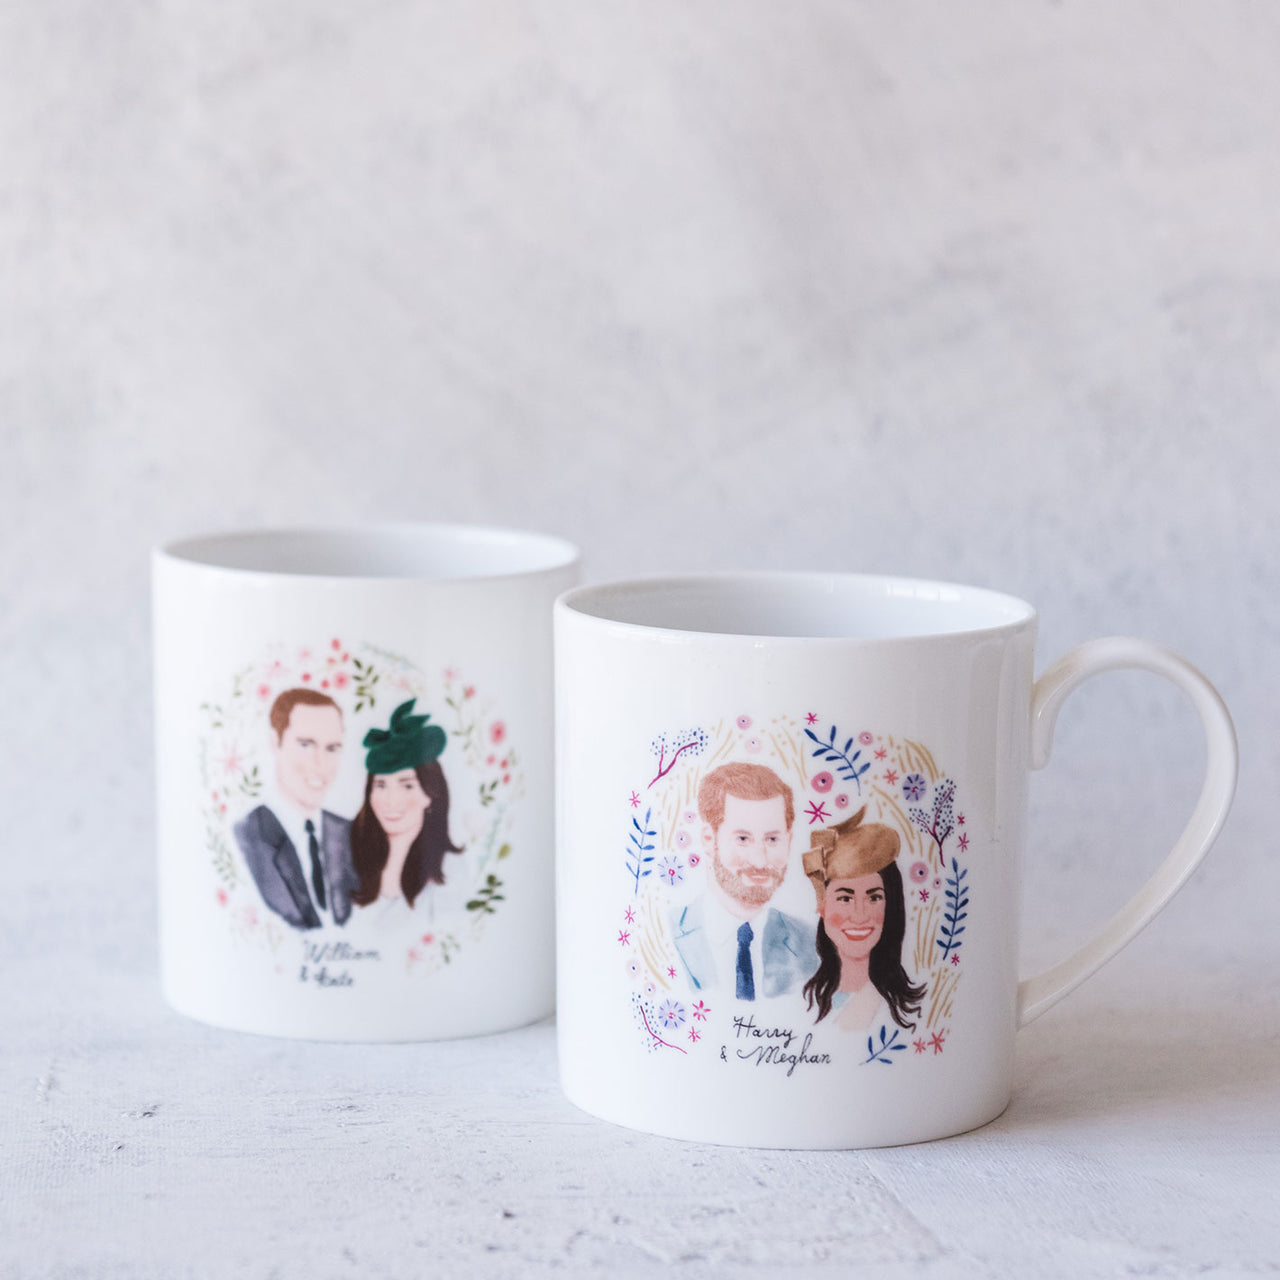 Mug set of Harry & Meghan & William & Kate. Illustration of each couple surrounded by illustrations of flowers.